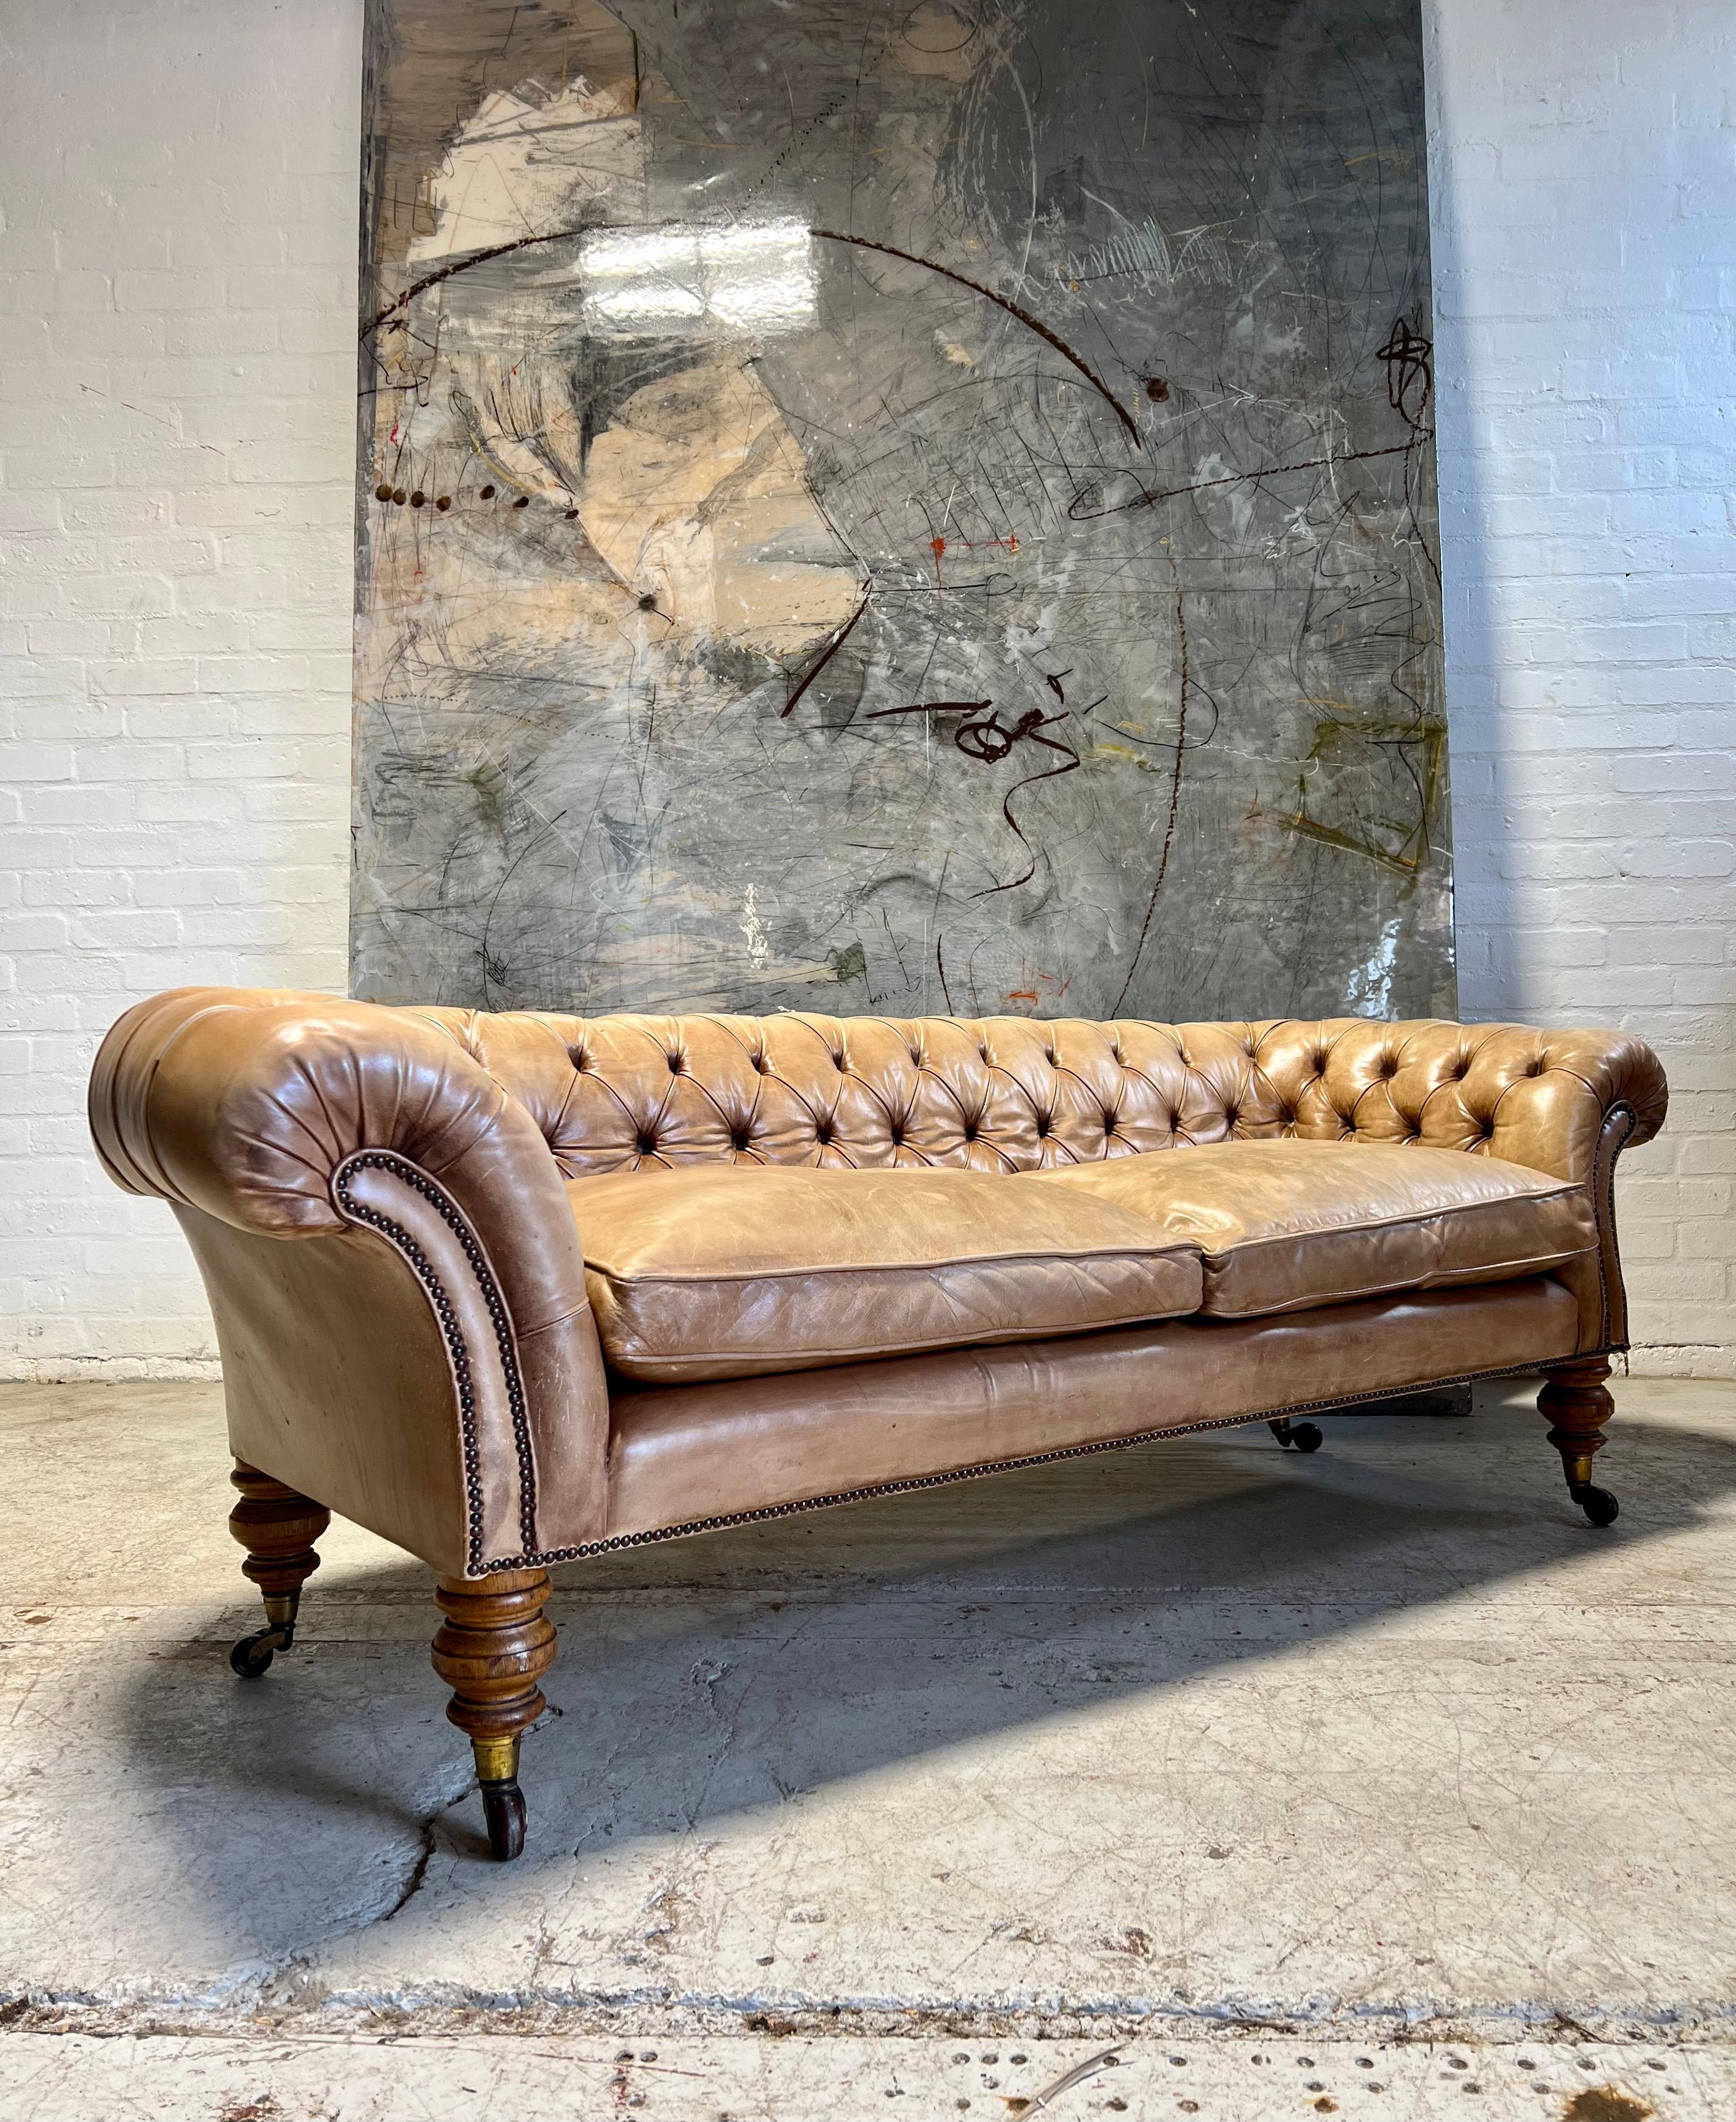 As a Lapada dealer and furniture maker, I always have a very good selection of pieces in stock with a wide range of price points.

This really is a beautiful 19thC Chesterfield sofa which has been previously restored into hand dyed parchment